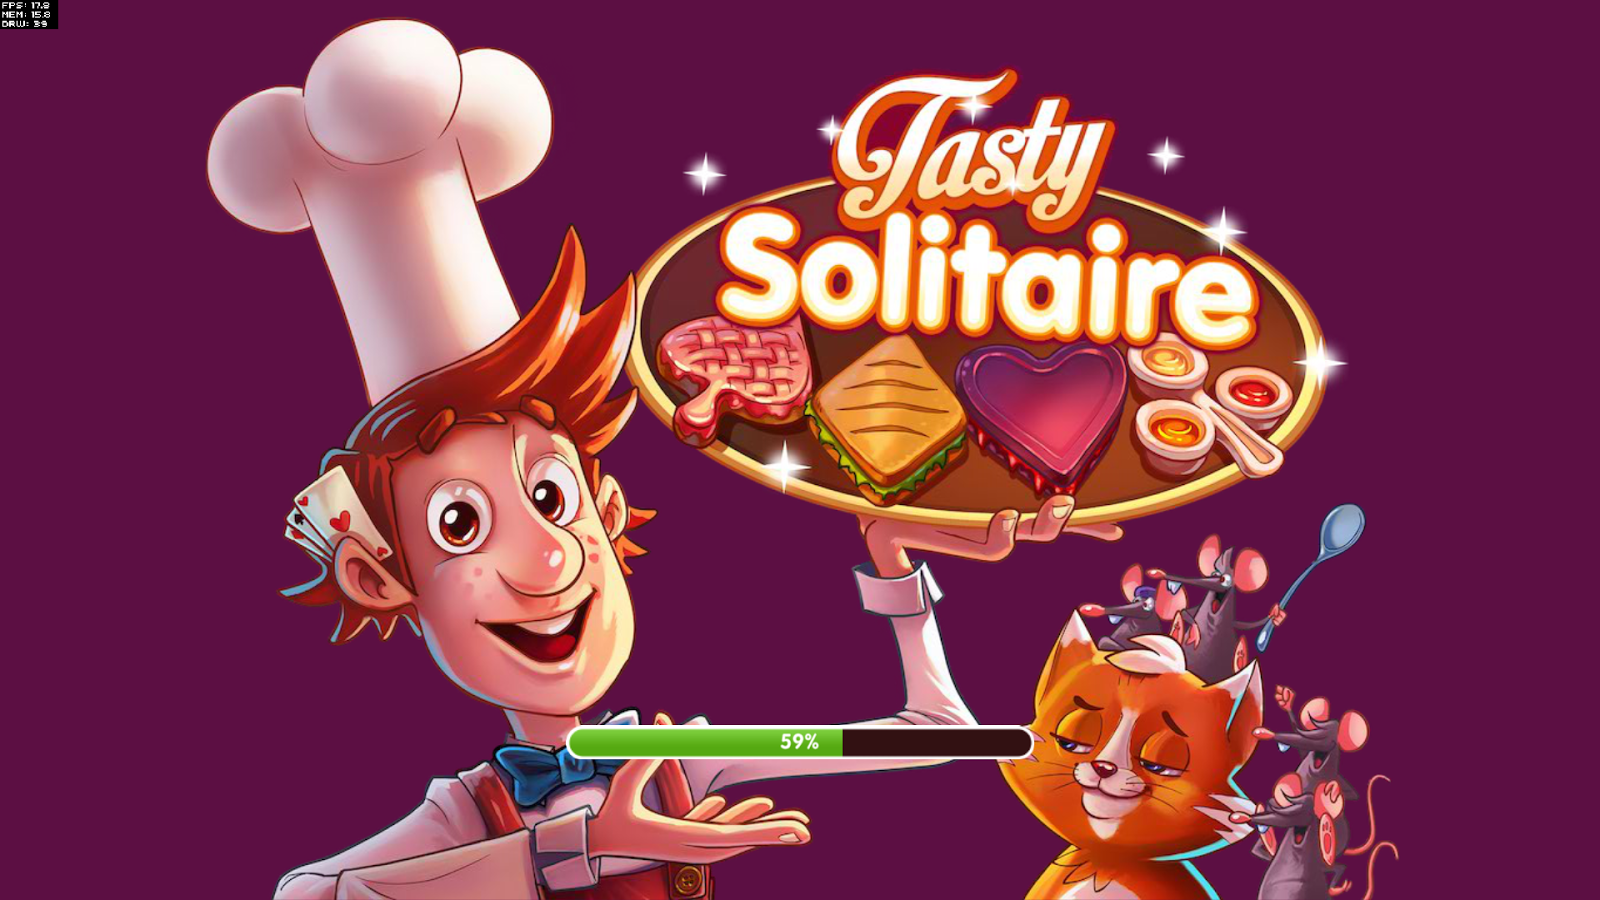 Tasty Solitaire